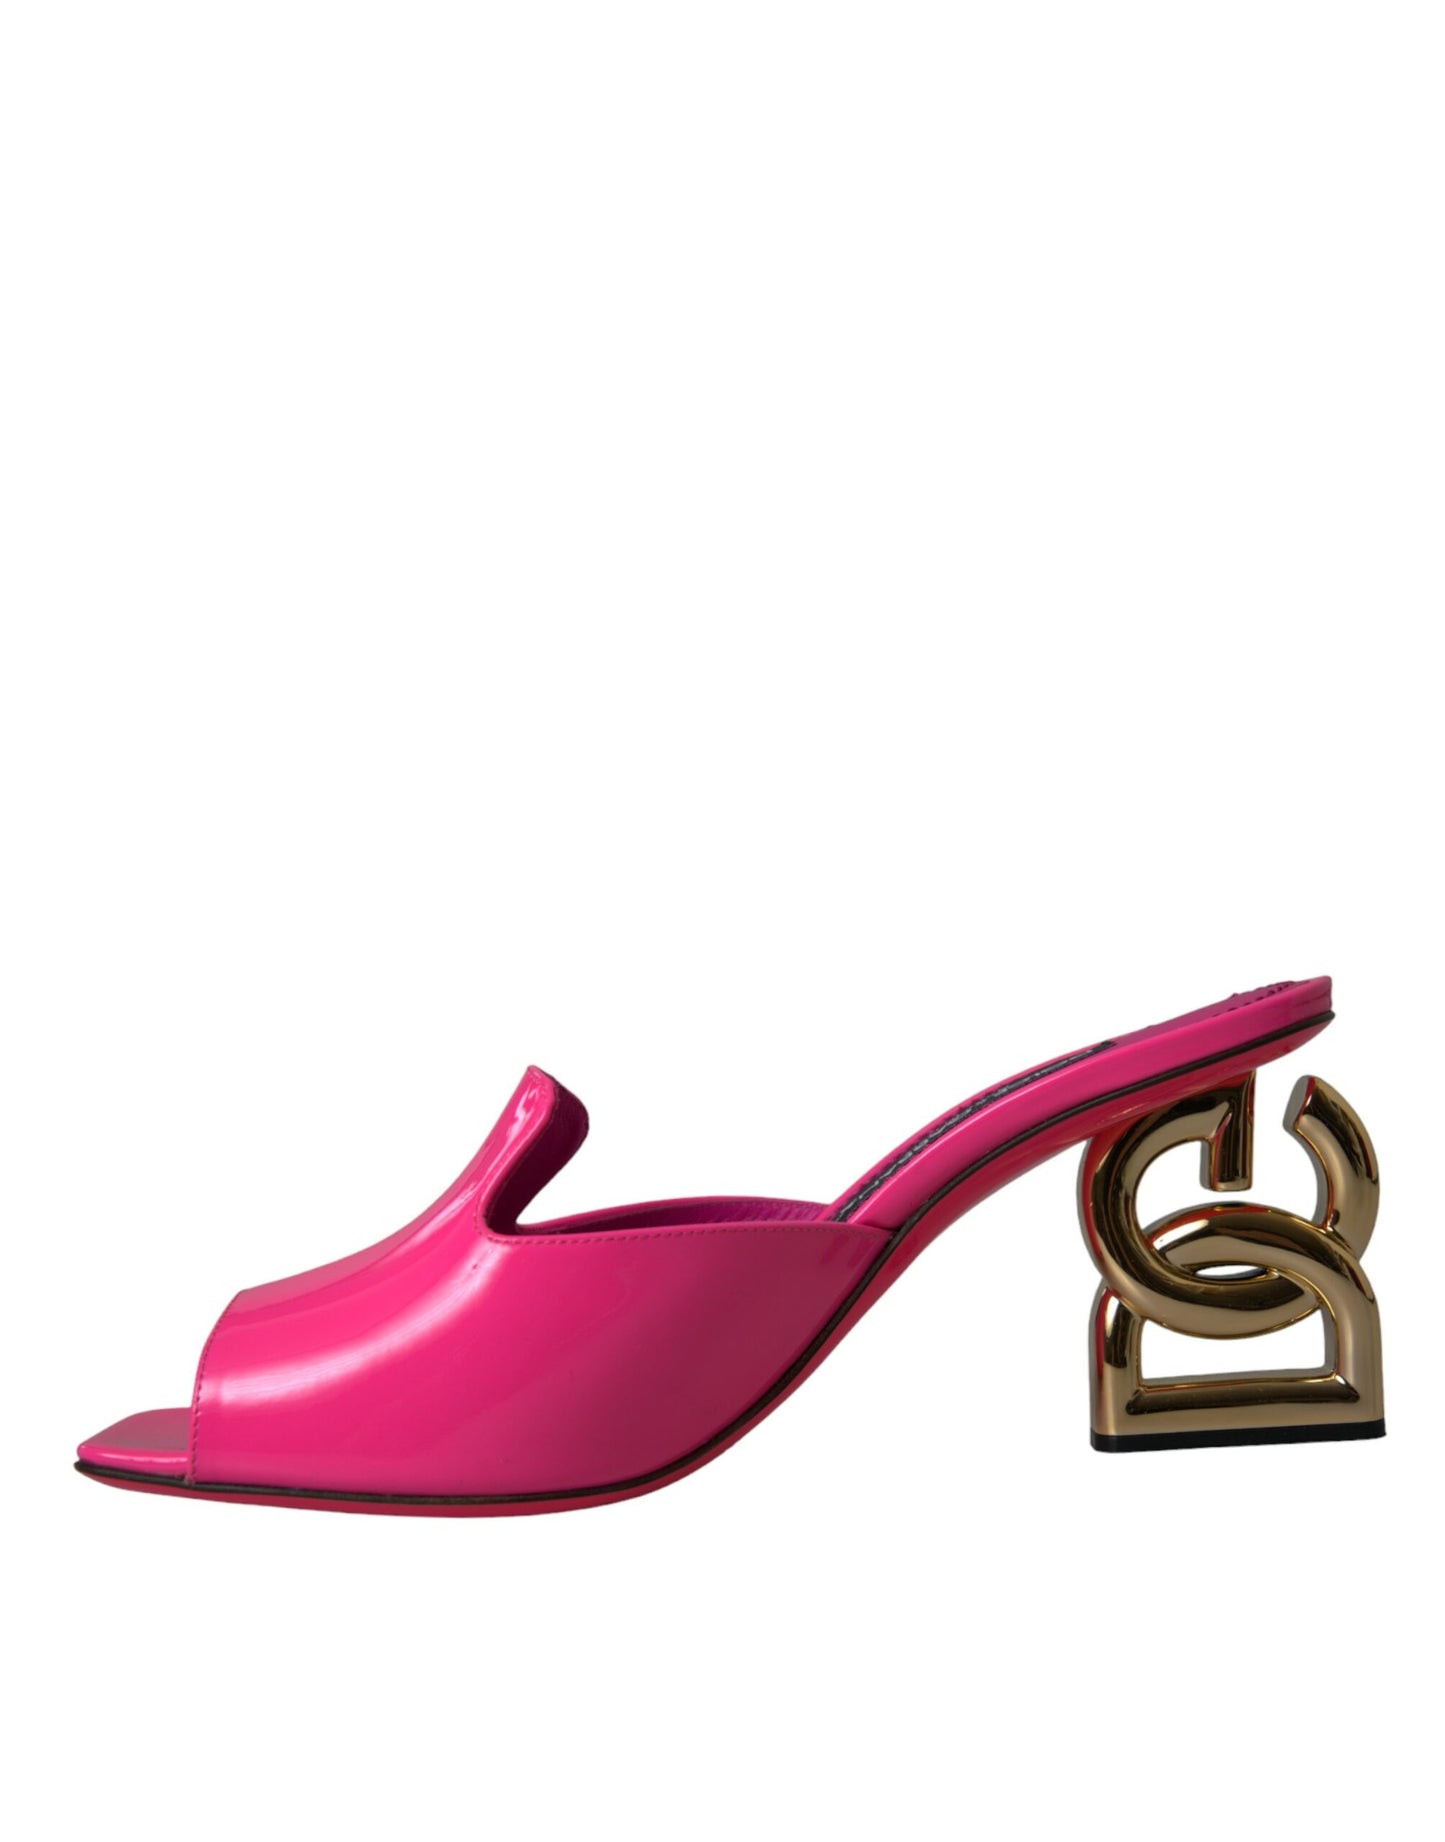 Dolce & Gabbana Neon Pink Leather Logo Heels Sandals Shoes